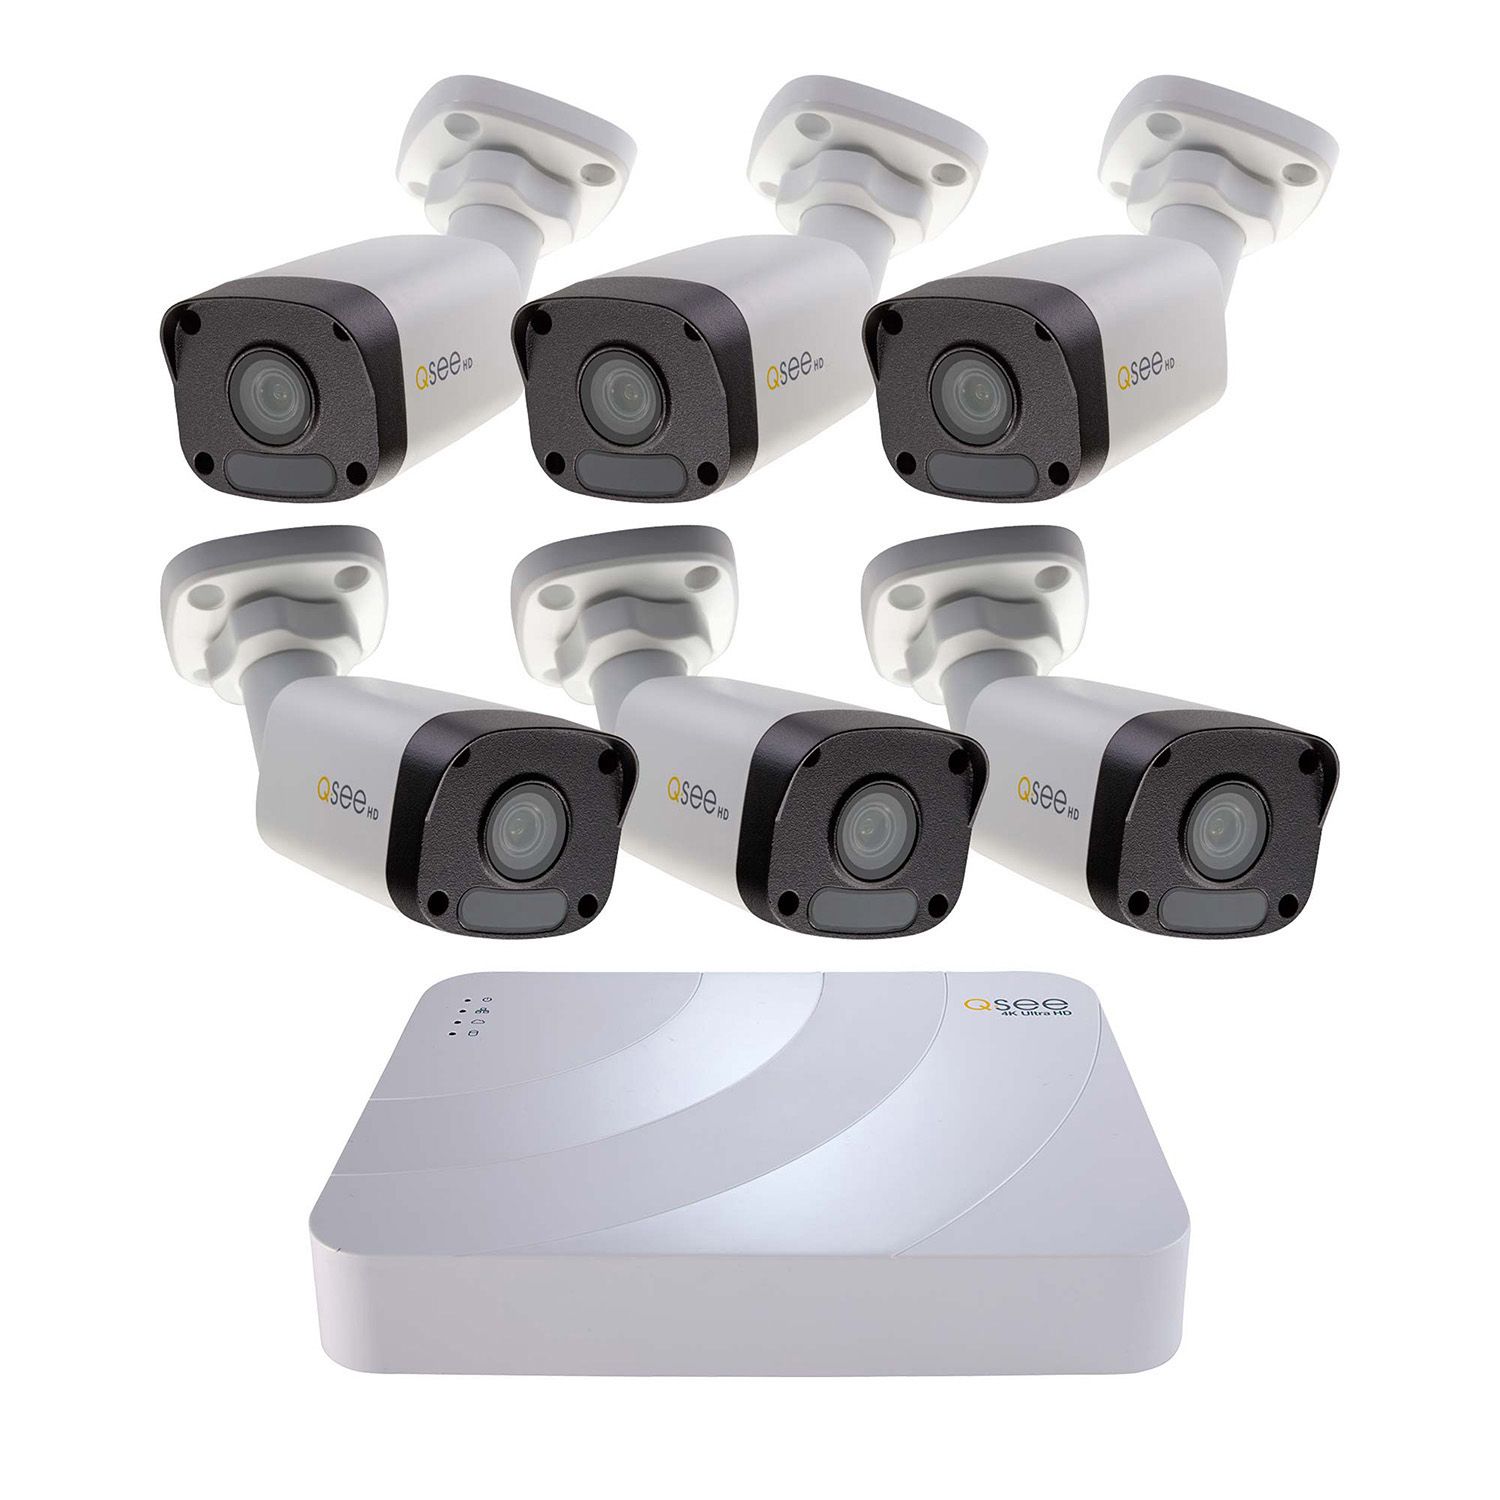 Q-See 1080P HD 8 Channel IP Security System with 2TB HDD and 6 1080P IP Bullet Cameras